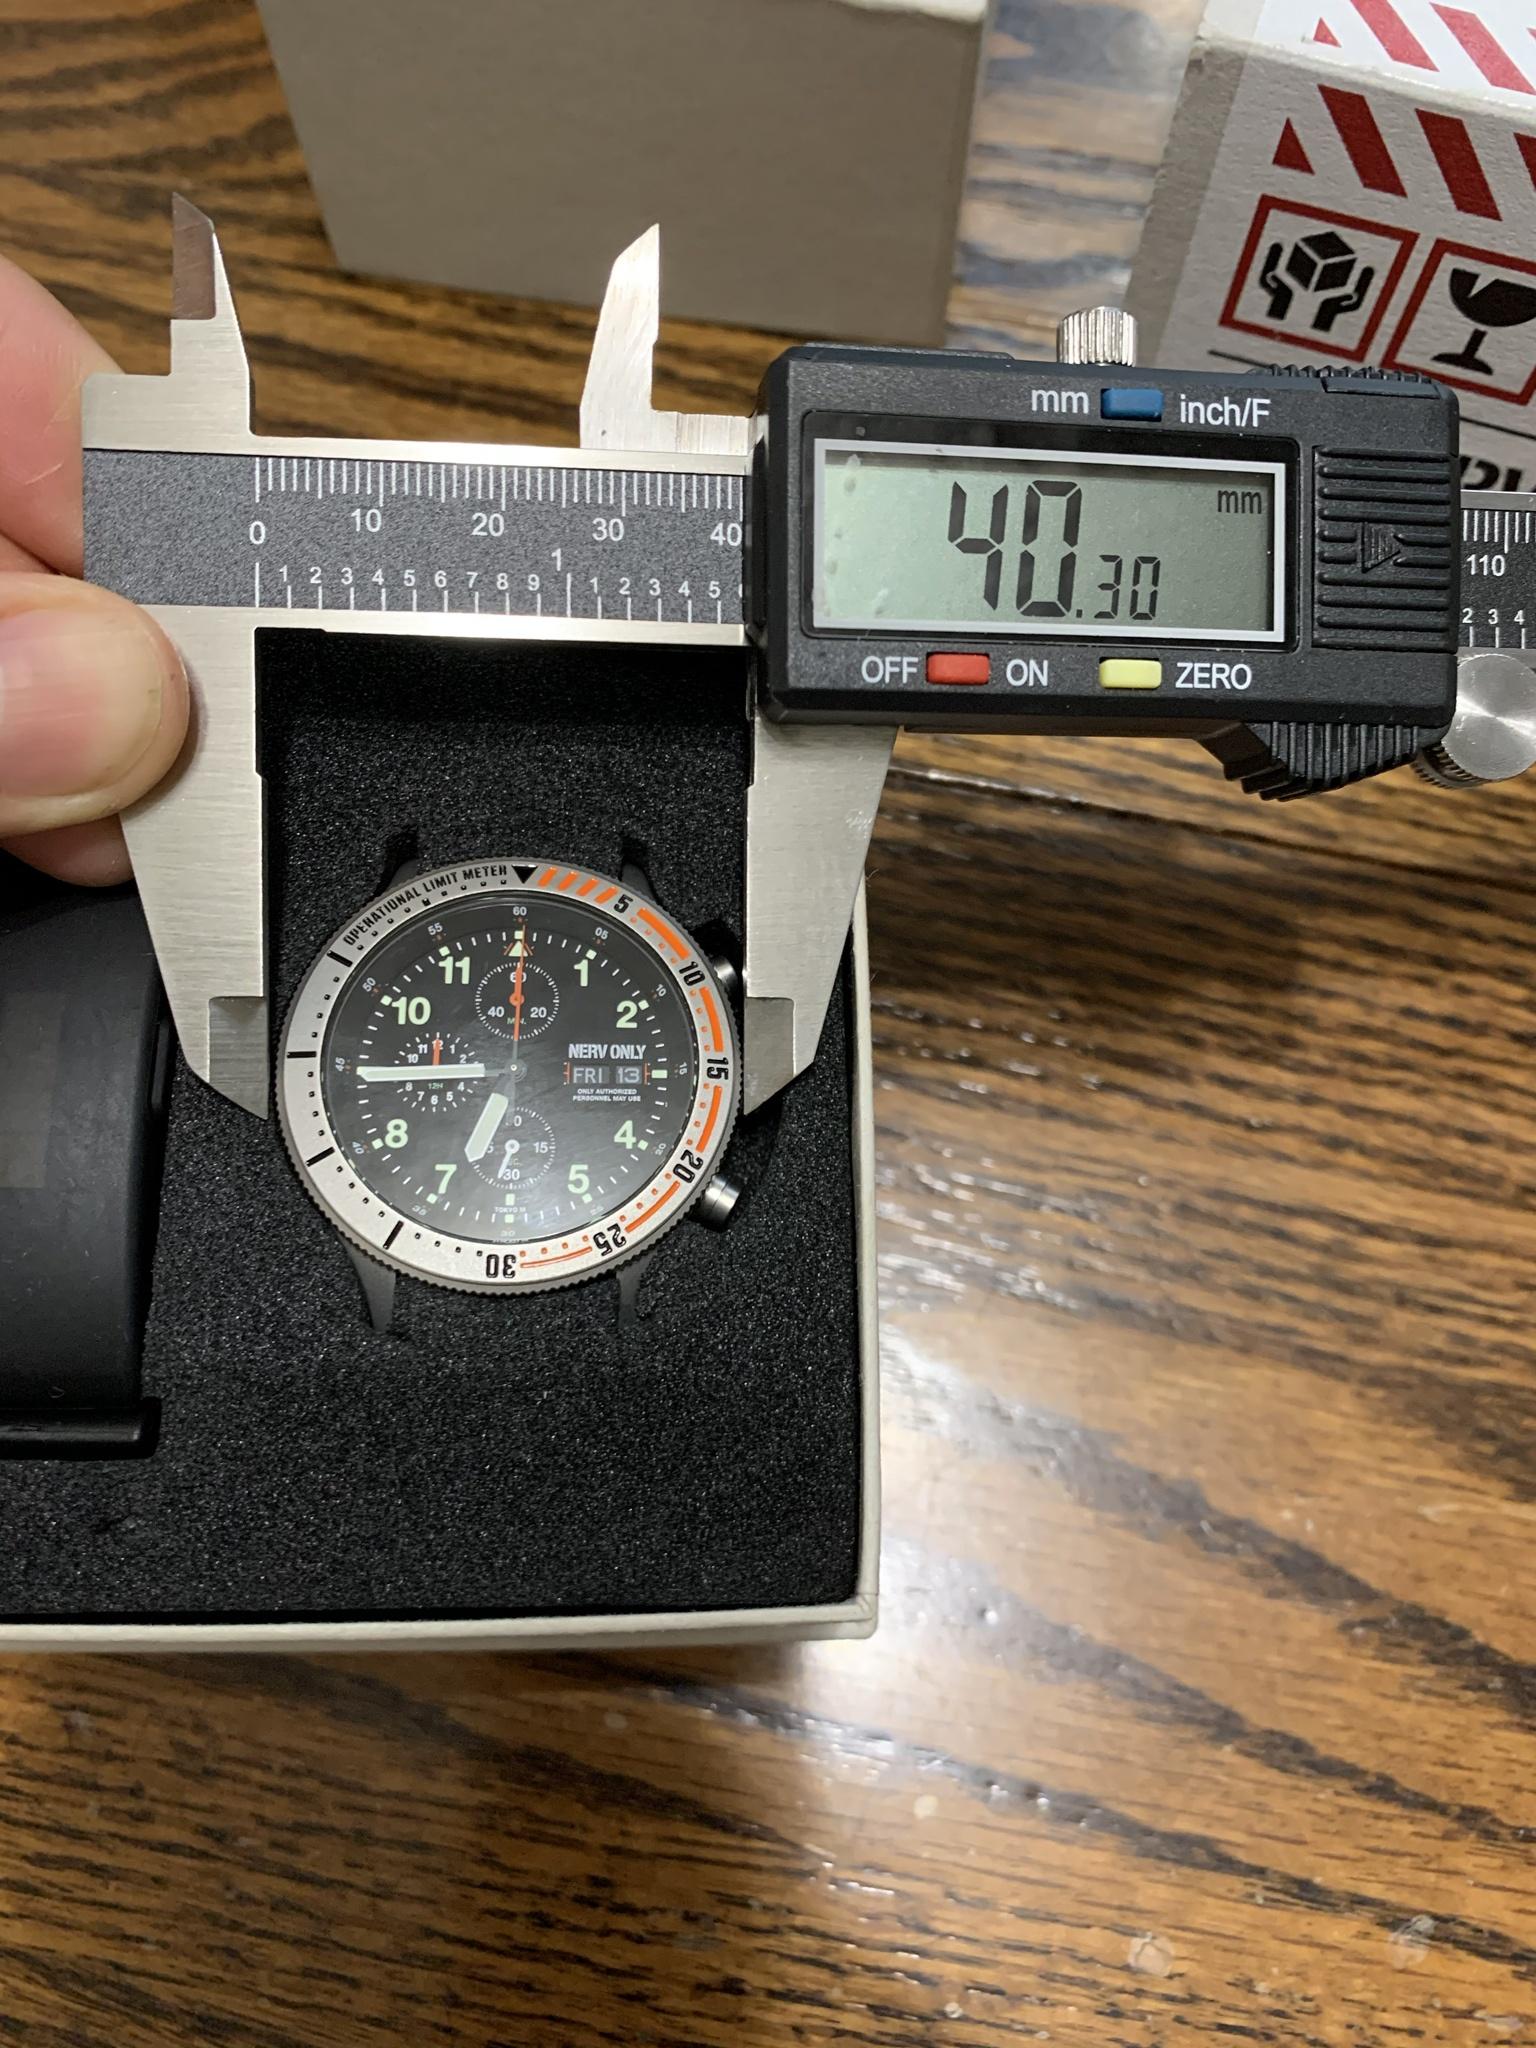 WTS] NERV ONLY EVANGELION WATCH AND SONY WENA WRIST ACTIVE